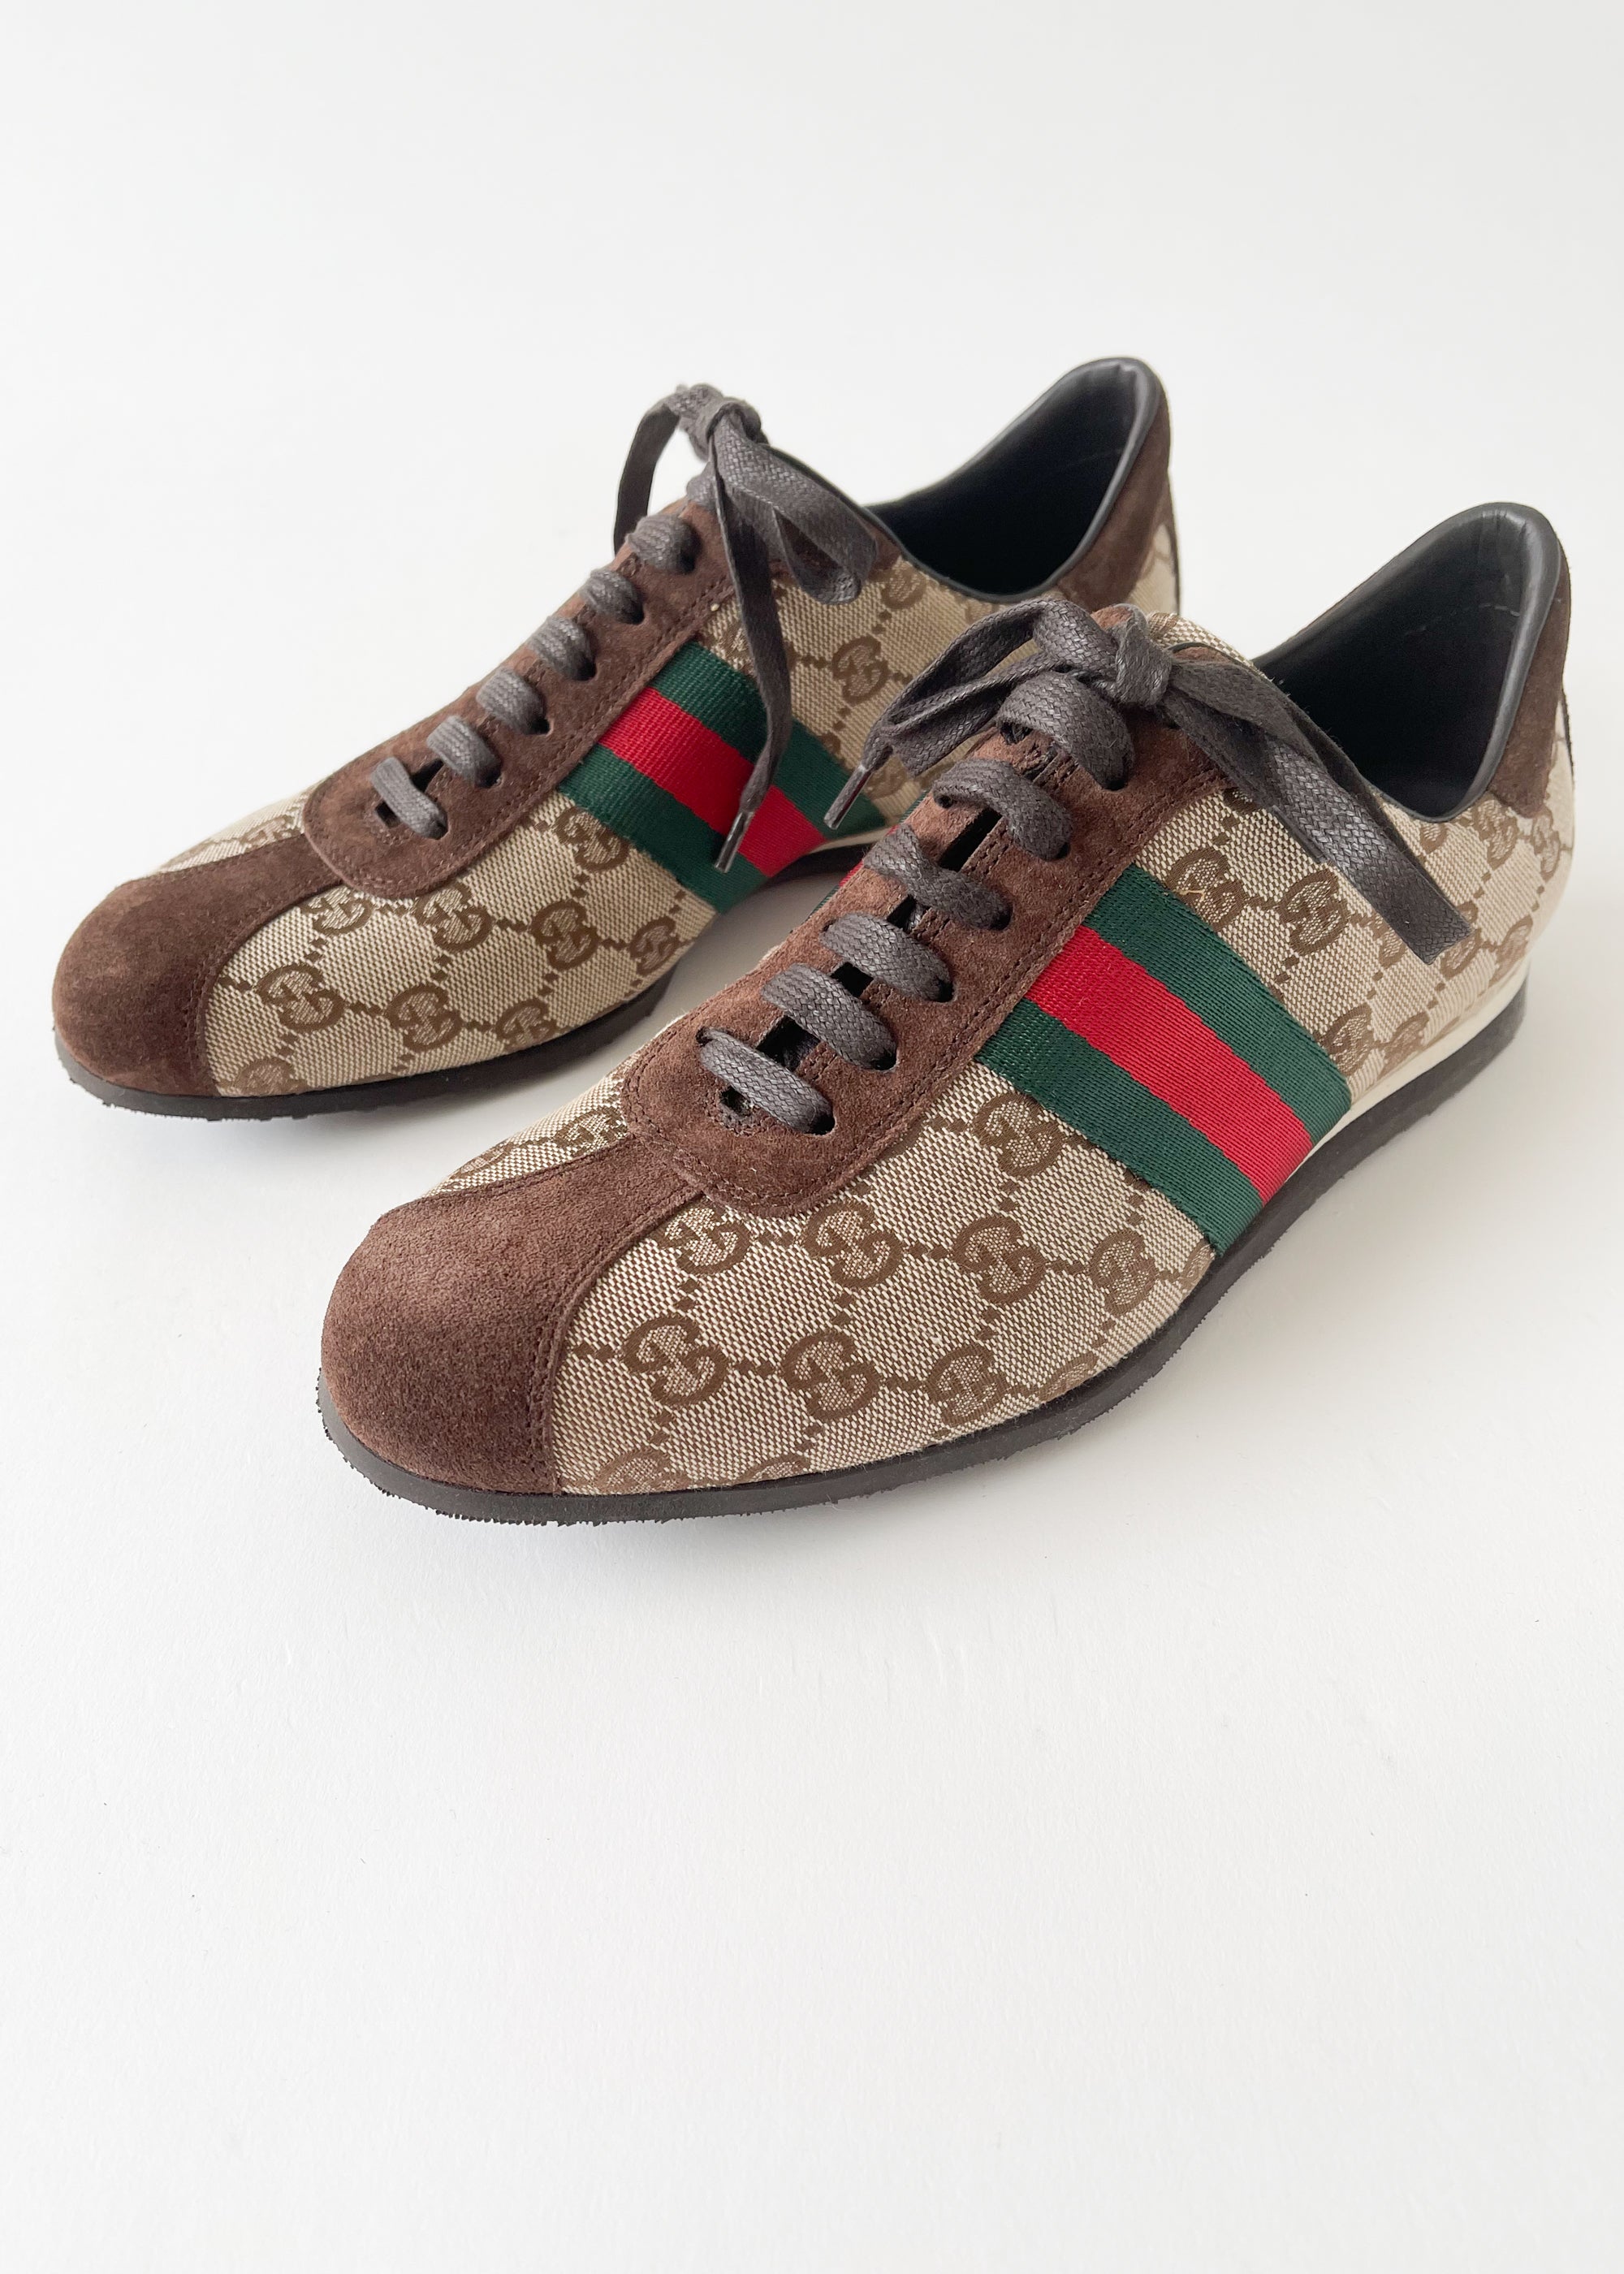 Gucci Leather Graphic Print Sneakers - Neutrals Sneakers, Shoes -  GUC1503100 | The RealReal